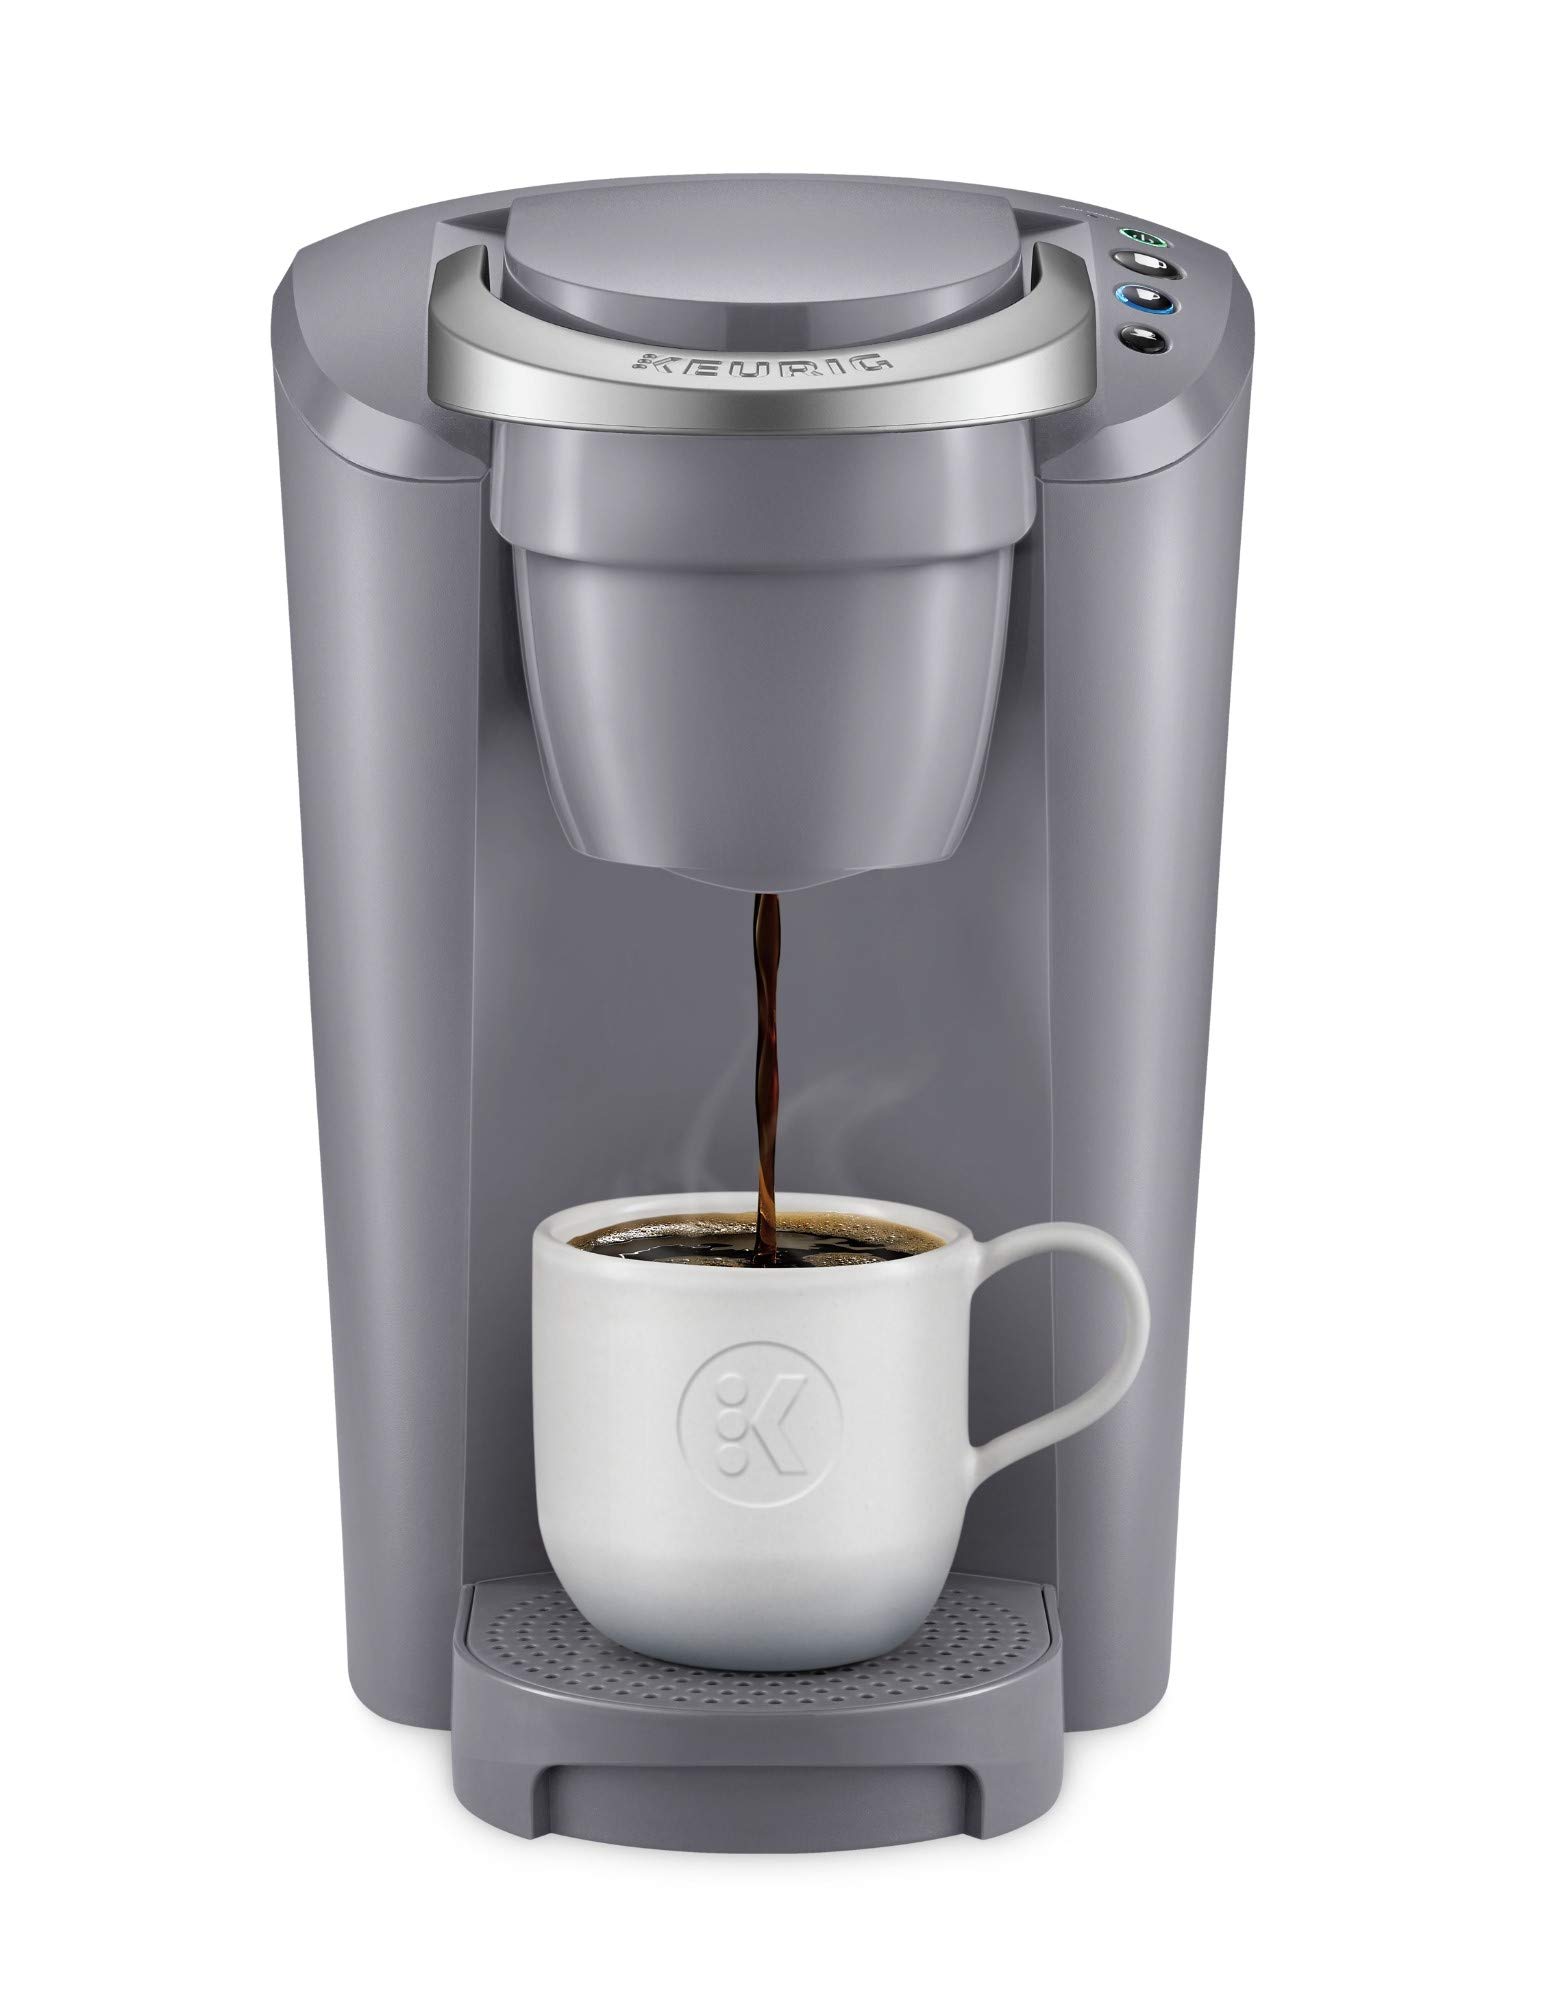 Keurig K-Compact Single-Serve K-Cup Pod Coffee Maker (Various Colors) $50 + Free Shipping